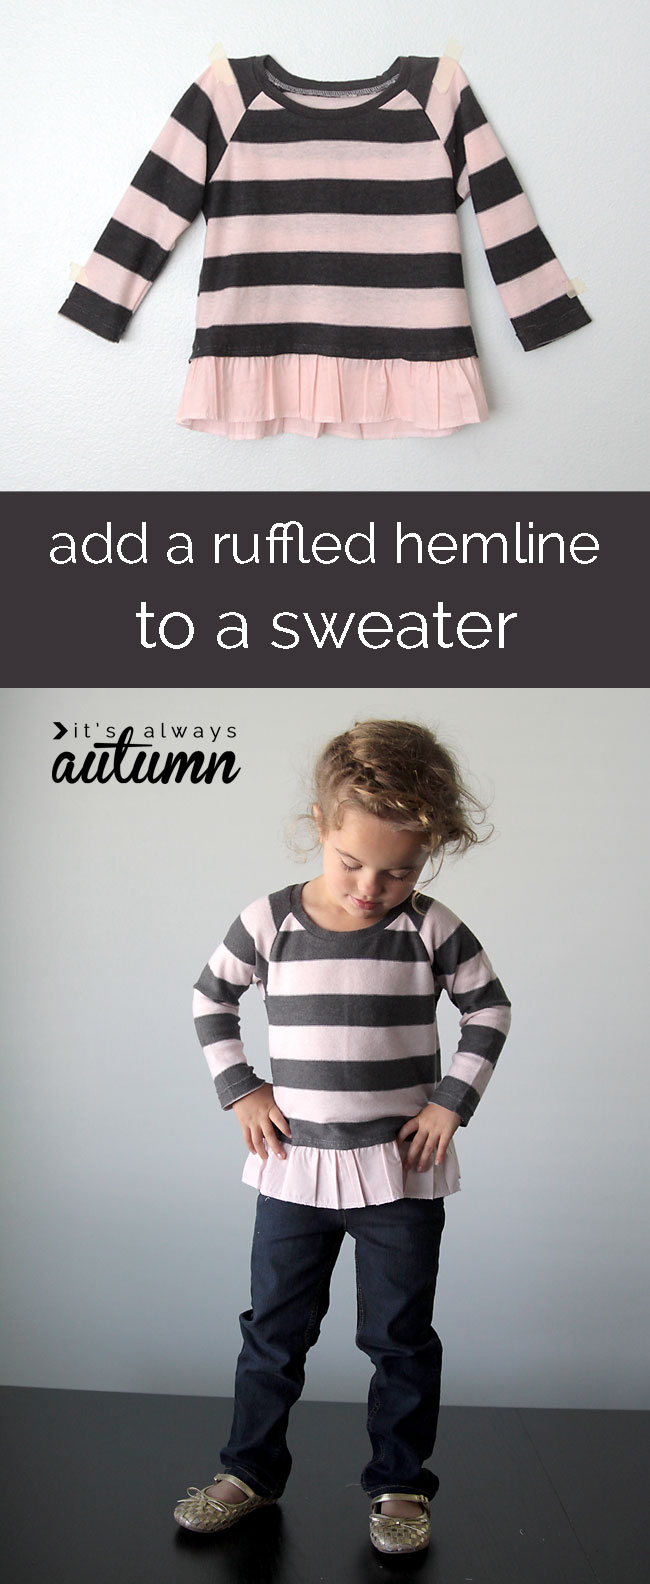 how to add a cute ruffled hem to a girl's sweater - easy sewing tutorial